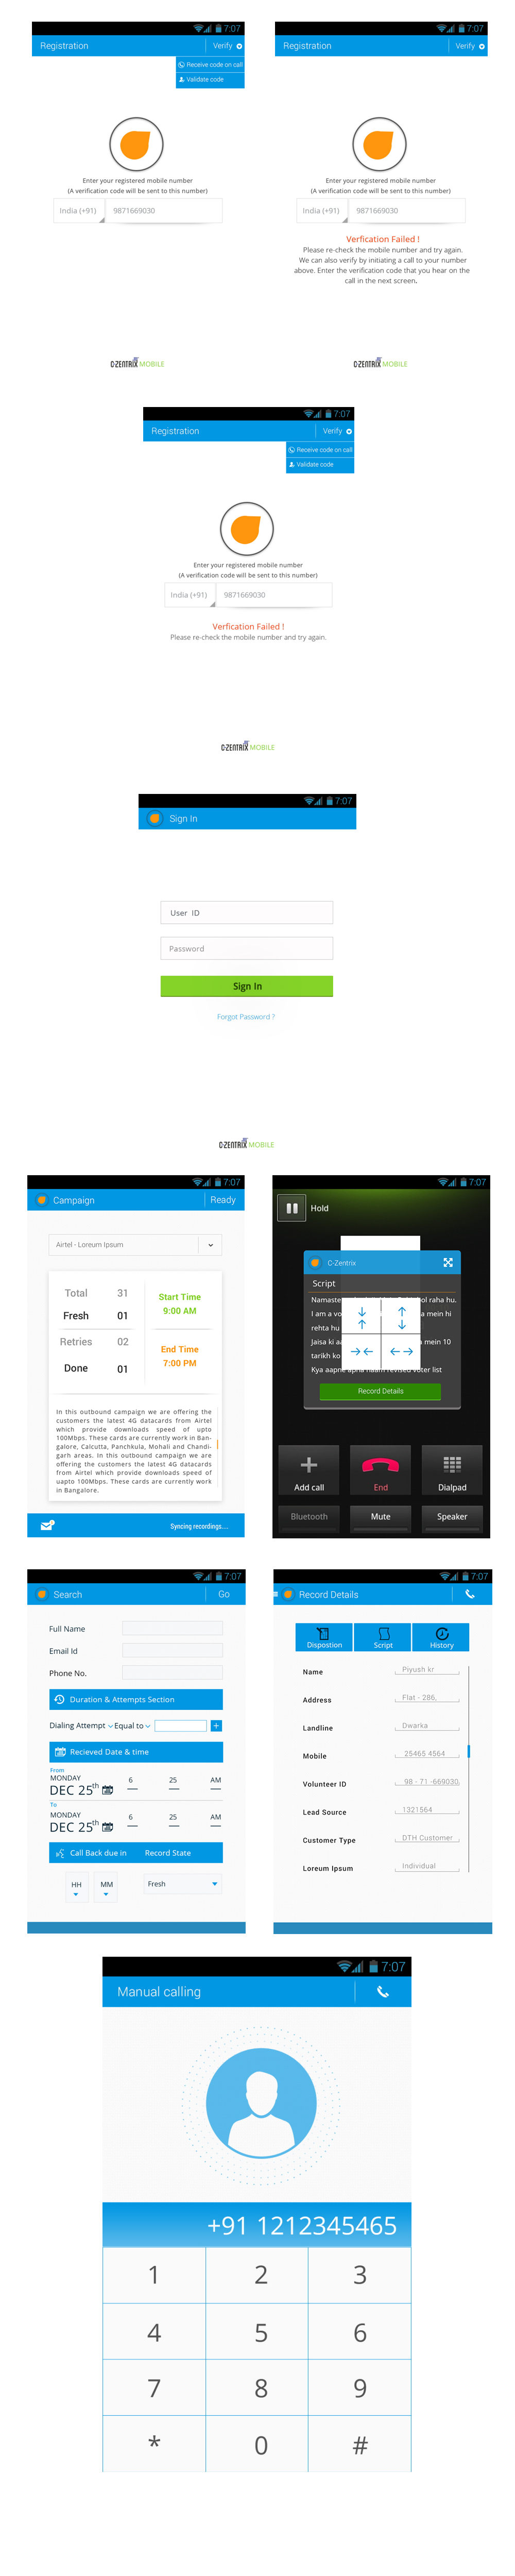 Andpoid apps corperate bpo customer support user interface application